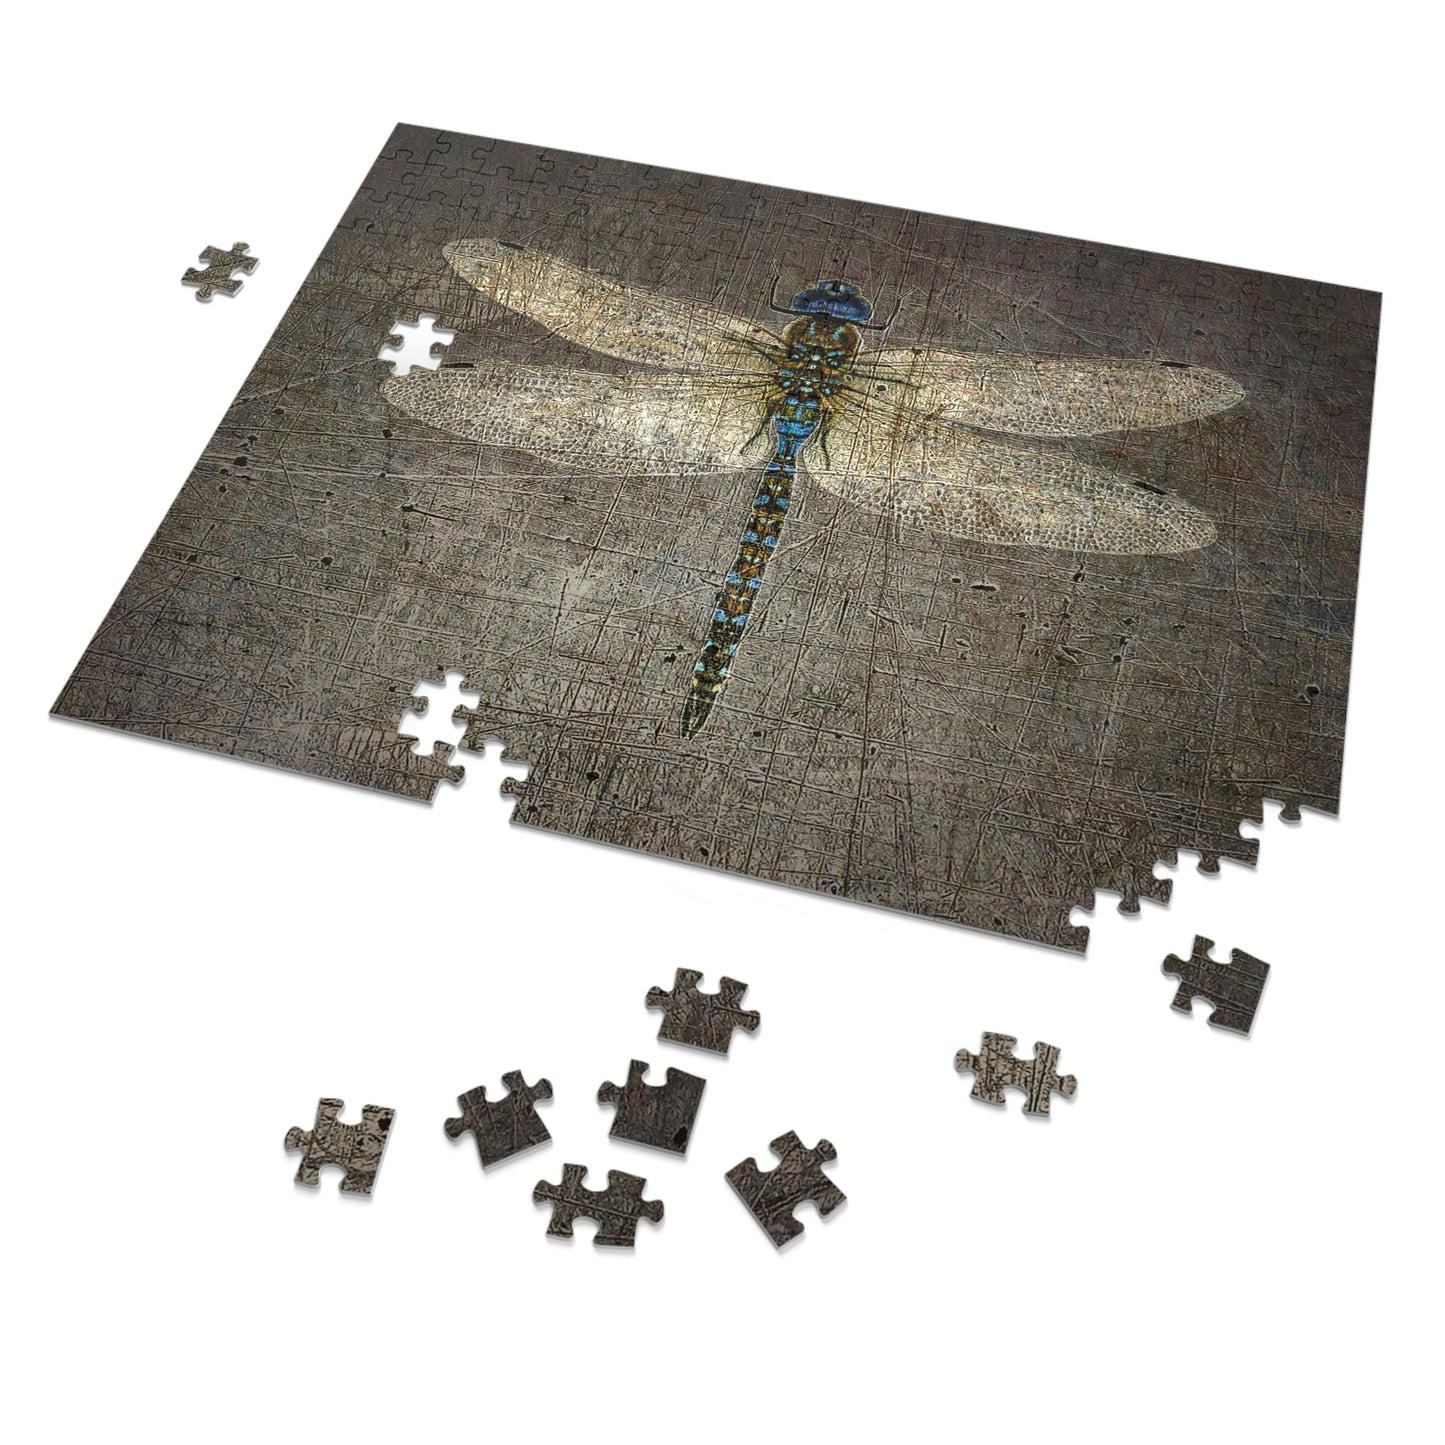 Dragonfly on Distressed Granite Background Puzzle 250 pieces in progress